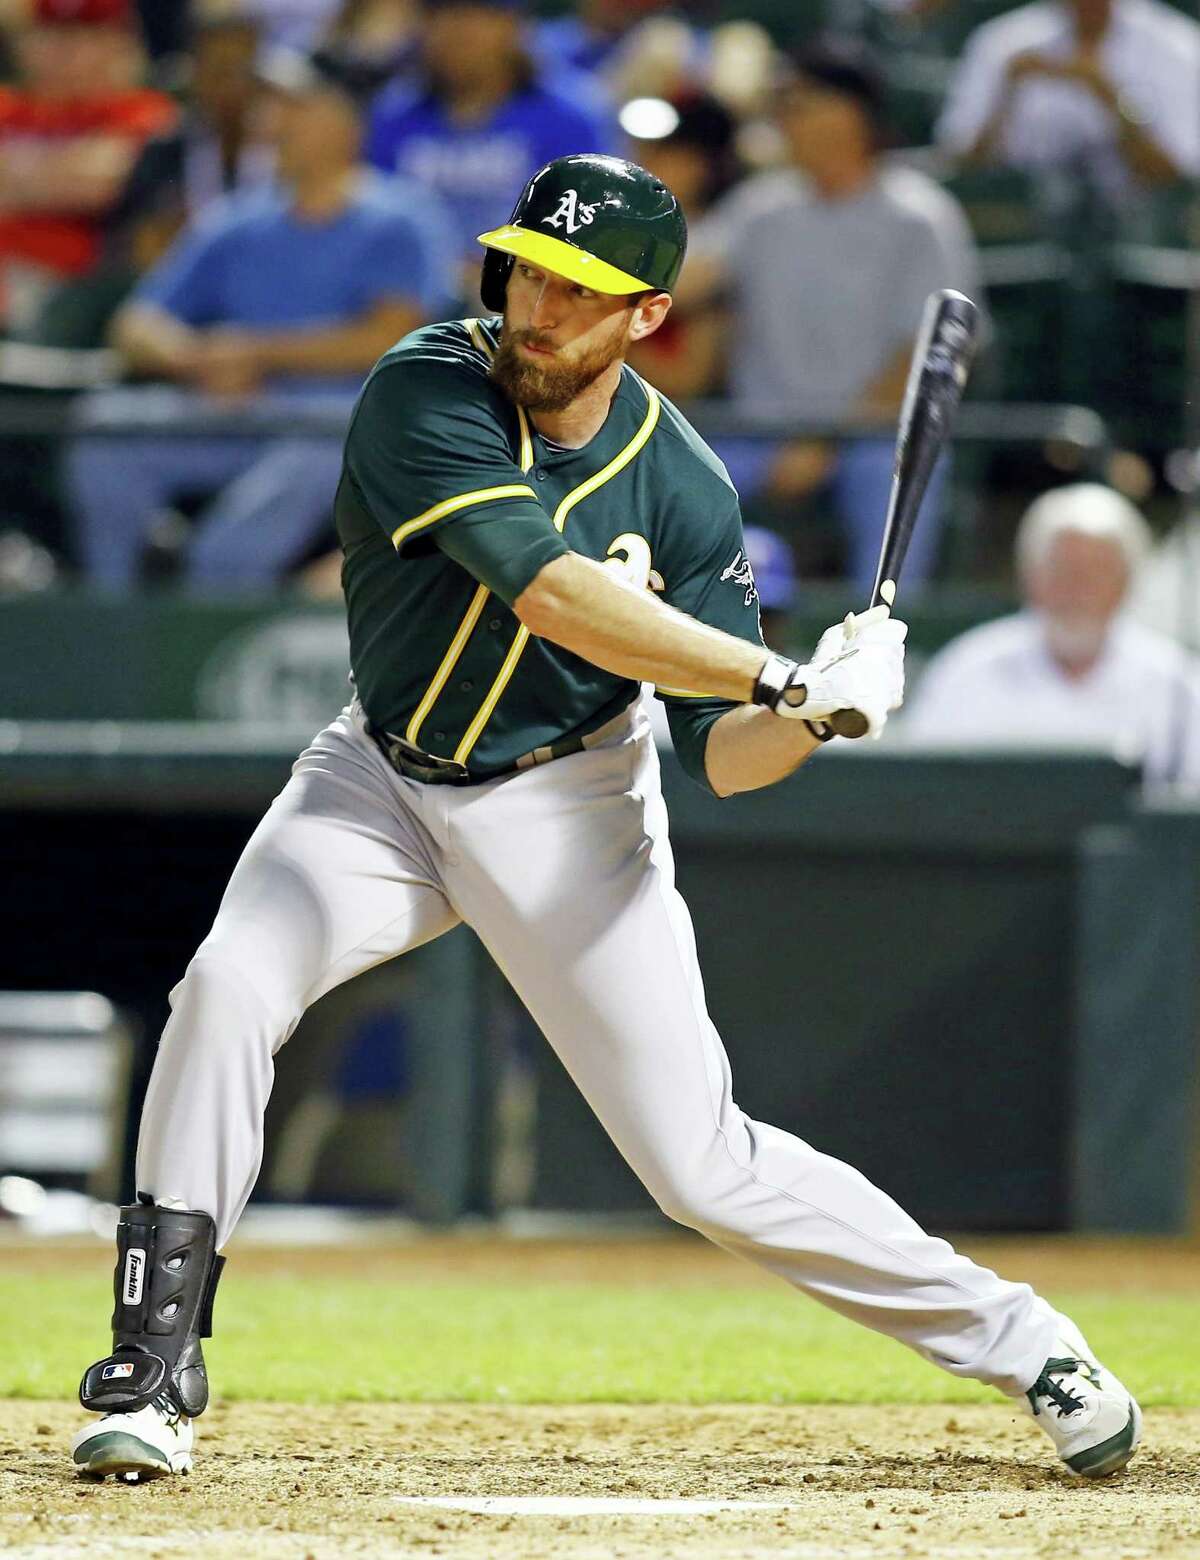 Ike Davis and the Yankees finalized a one-year deal on Monday.